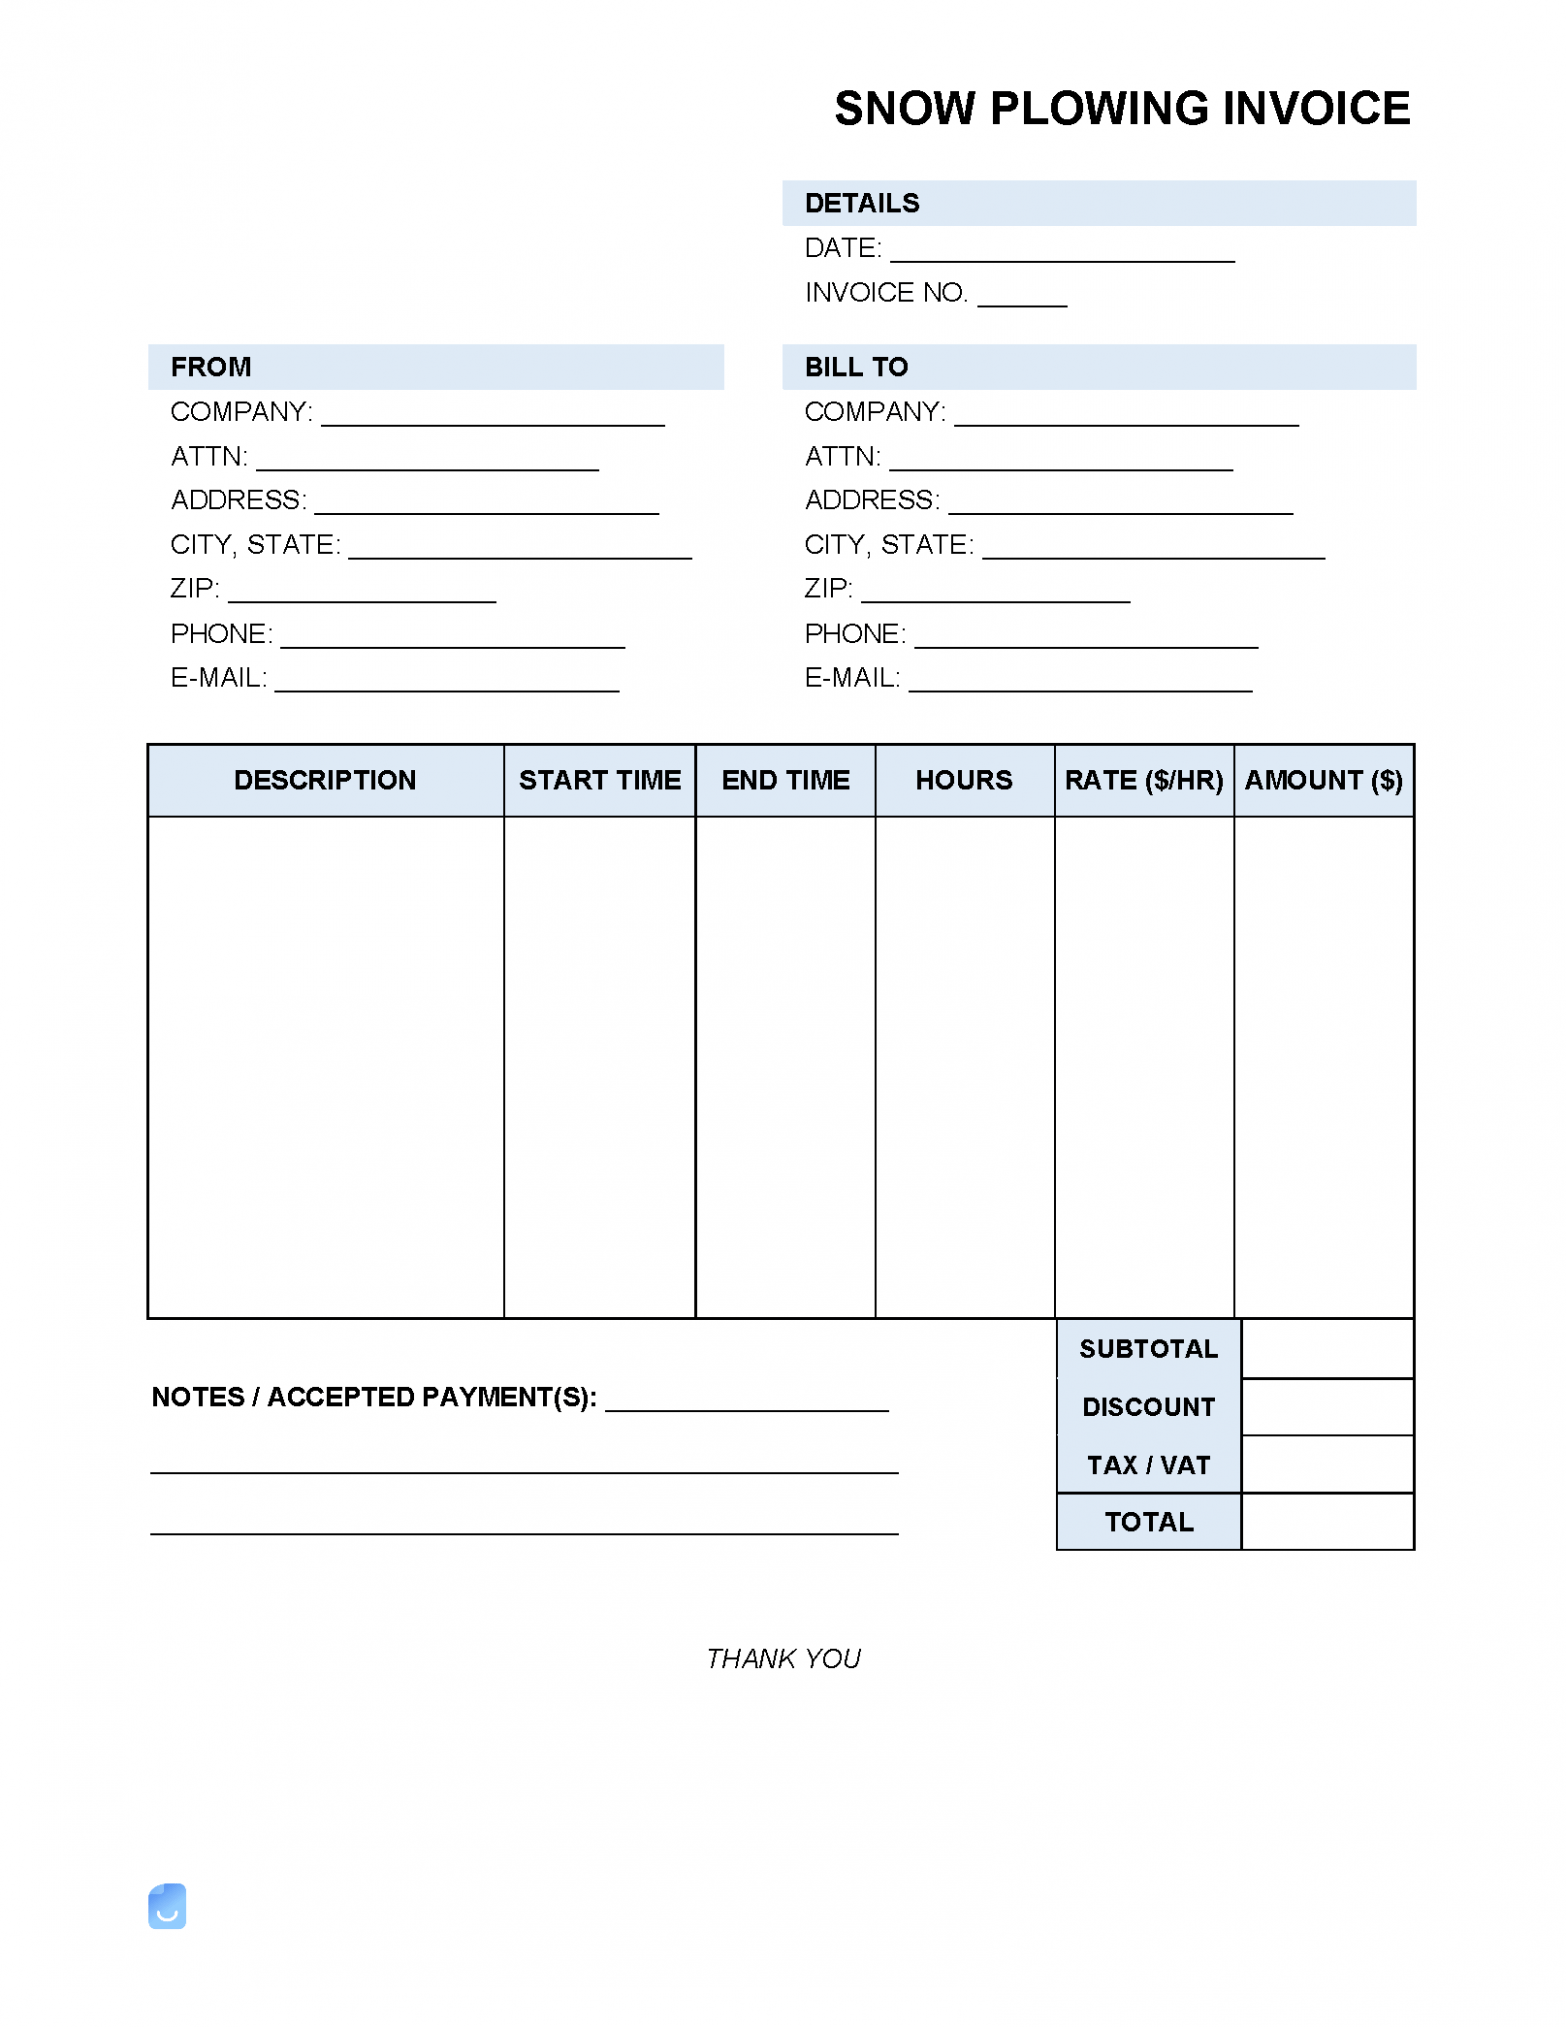 Editable Snow Plowing Invoice Template 